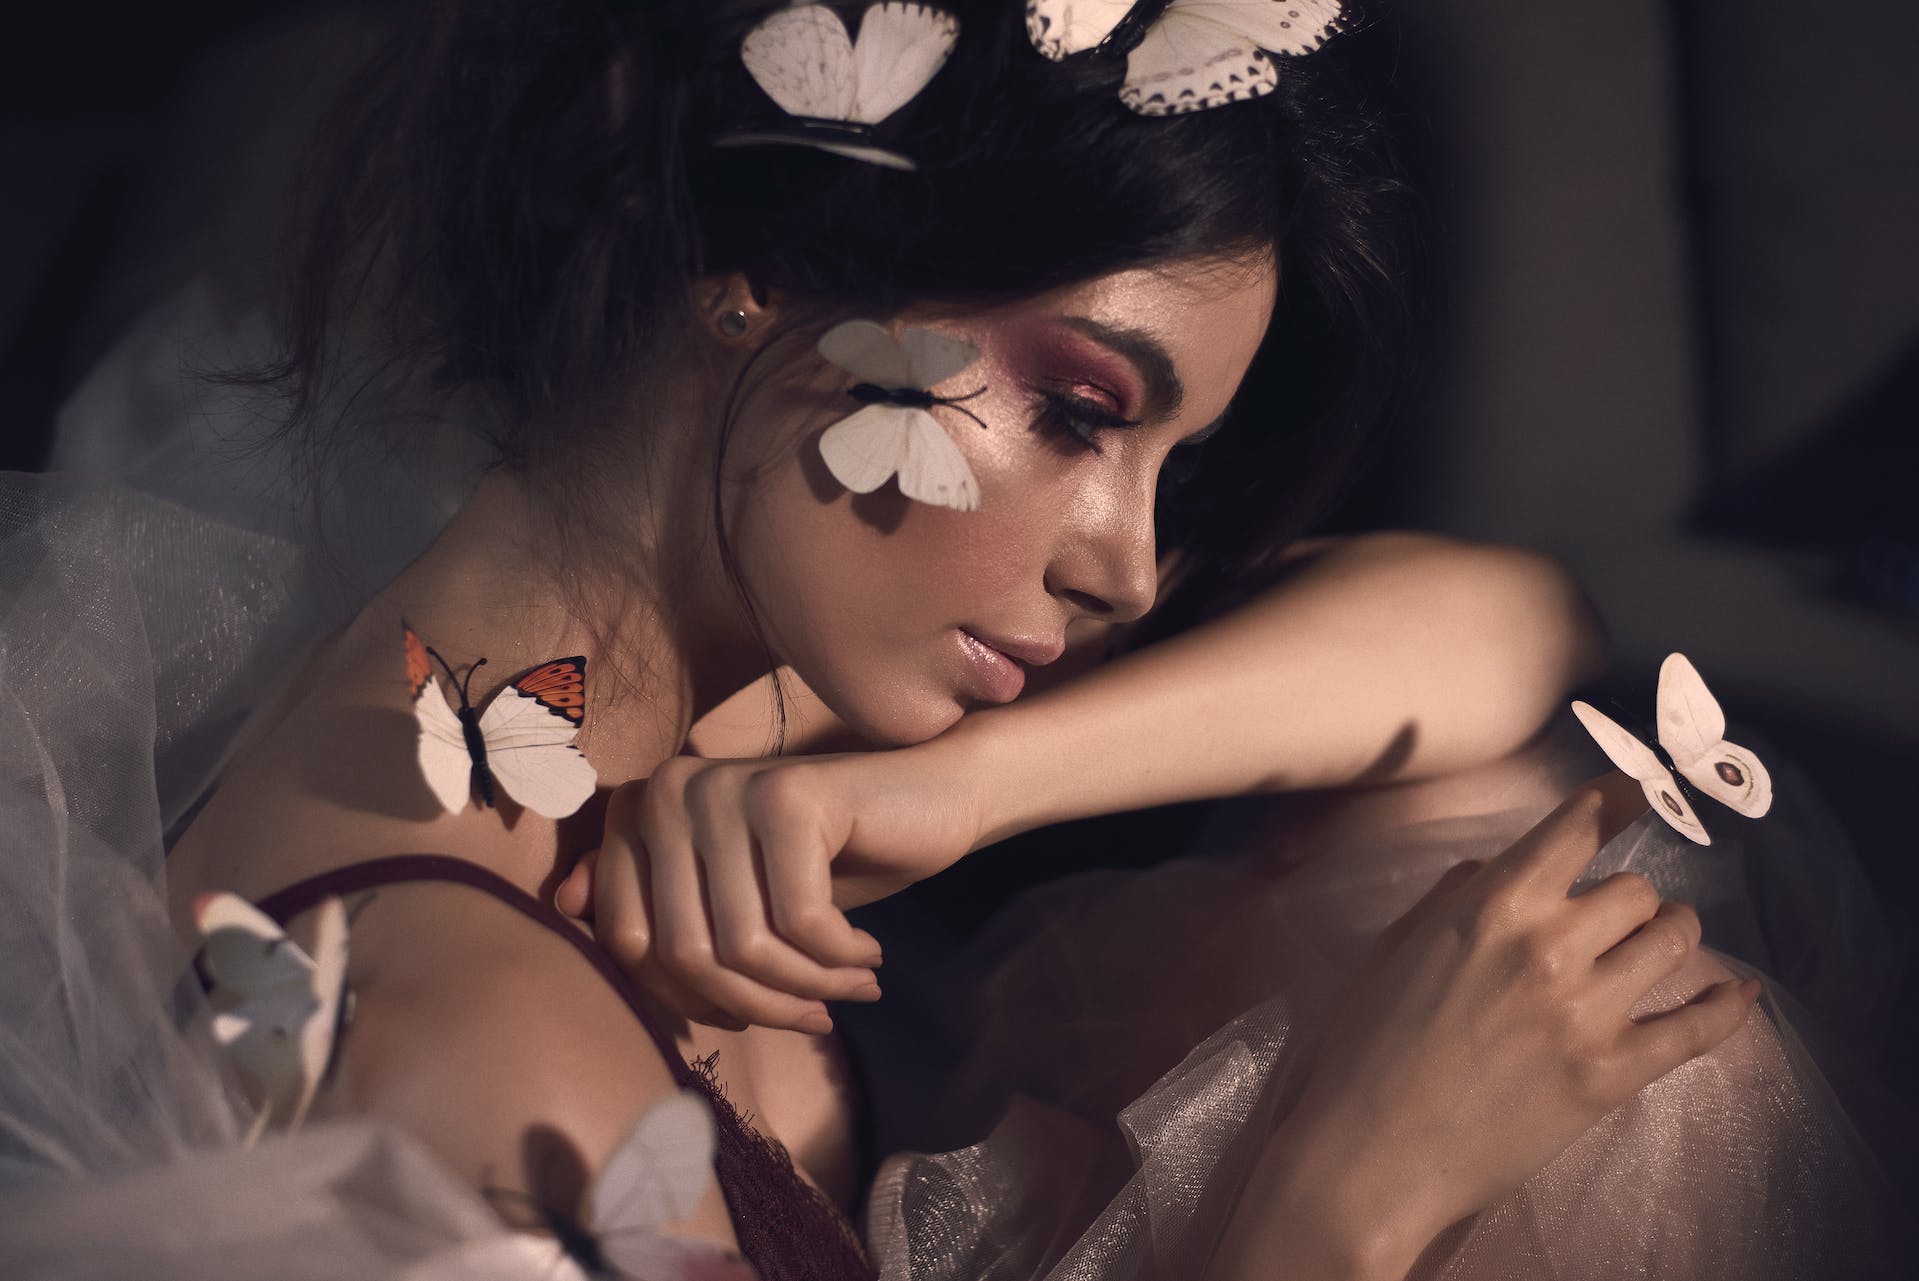 Ethereal woman covered in butterflies sits contemplating a butterfly on her finger